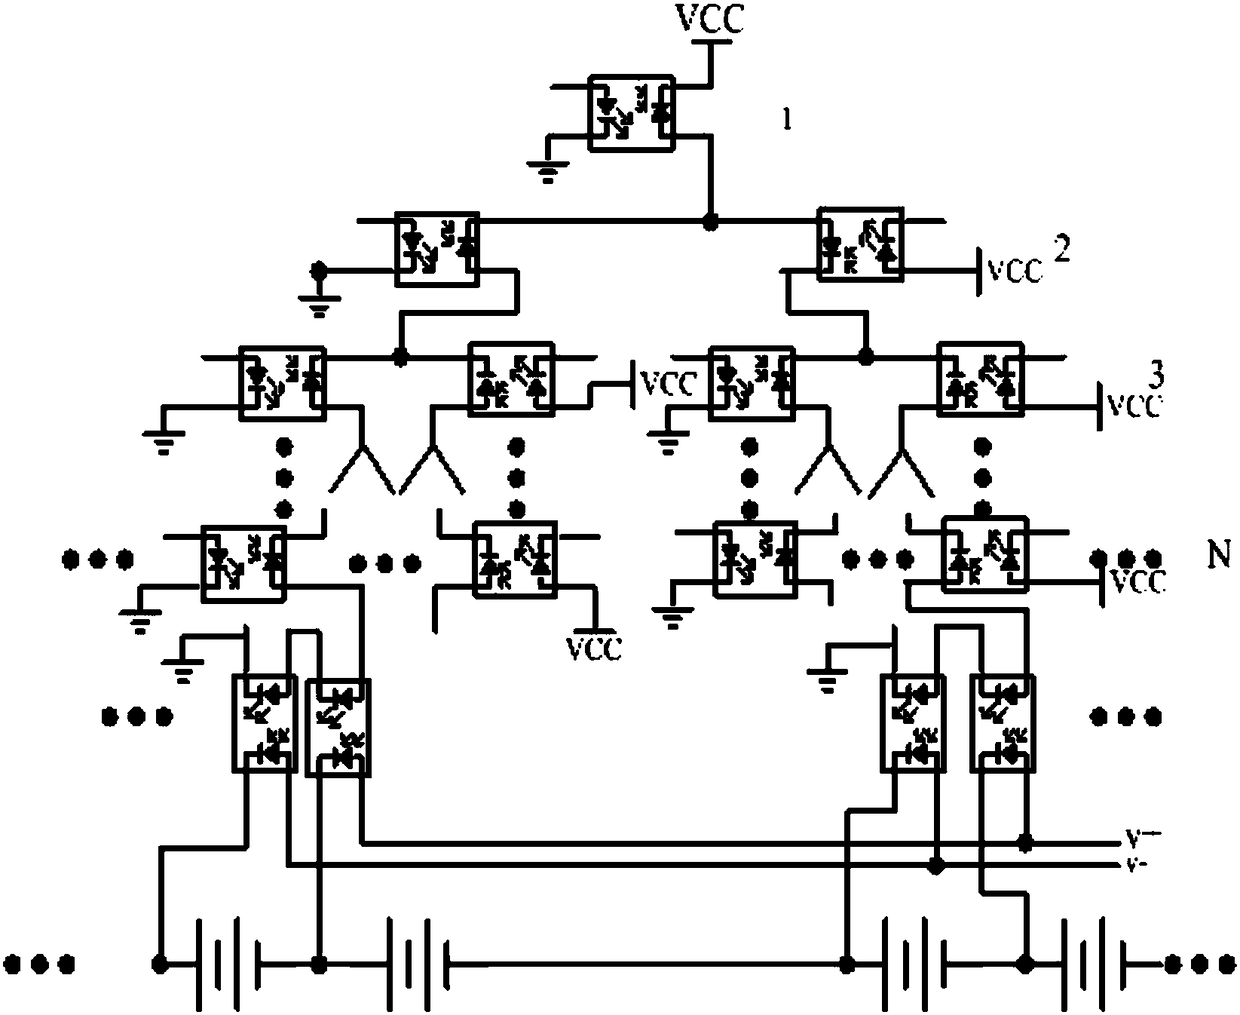 Battery module cell voltage collection system based on traversing binary tree